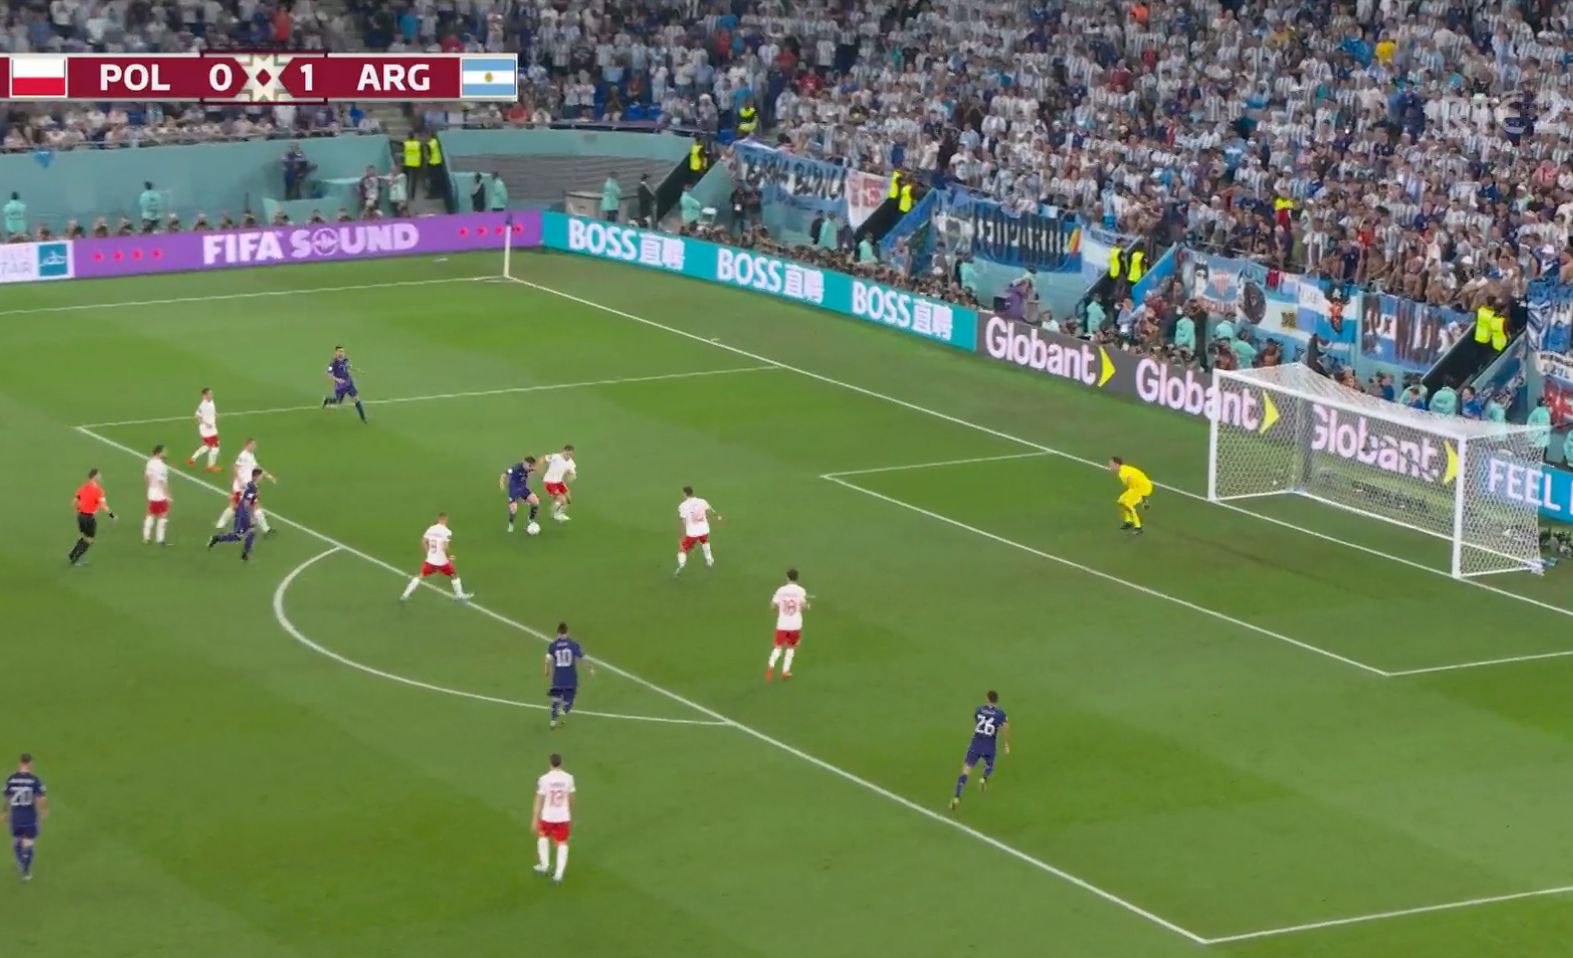 Video: Argentina set for victory after stunner from Man City’s
Julian Alvarez